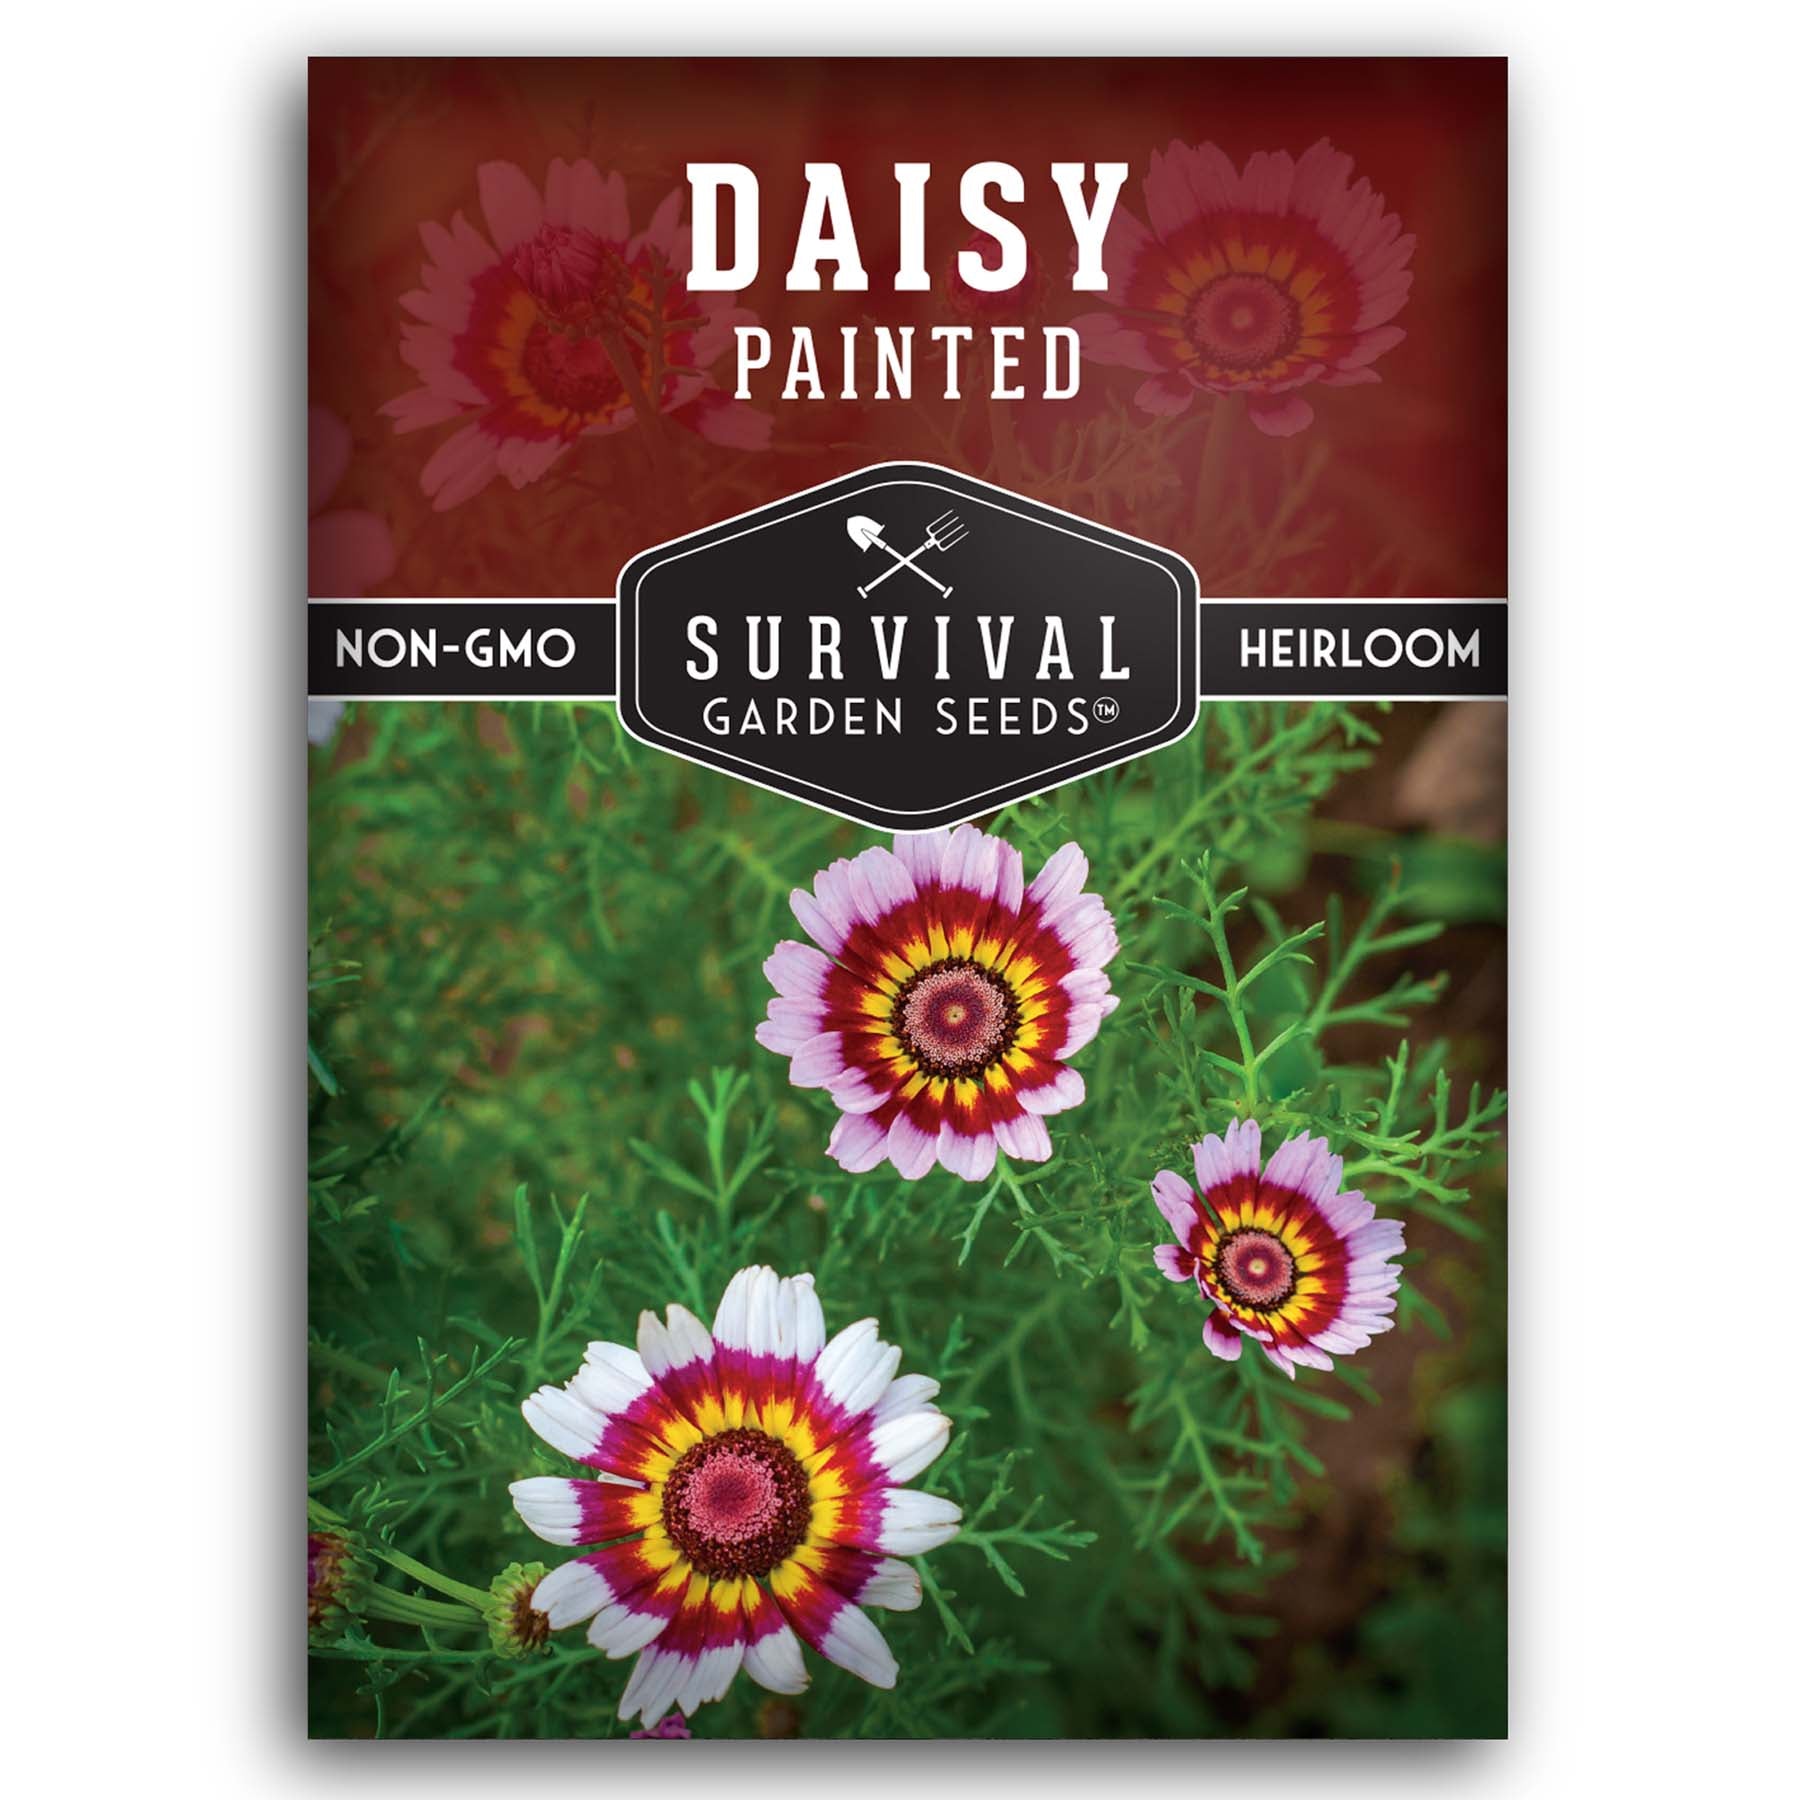 Painted Daisy seeds for planting